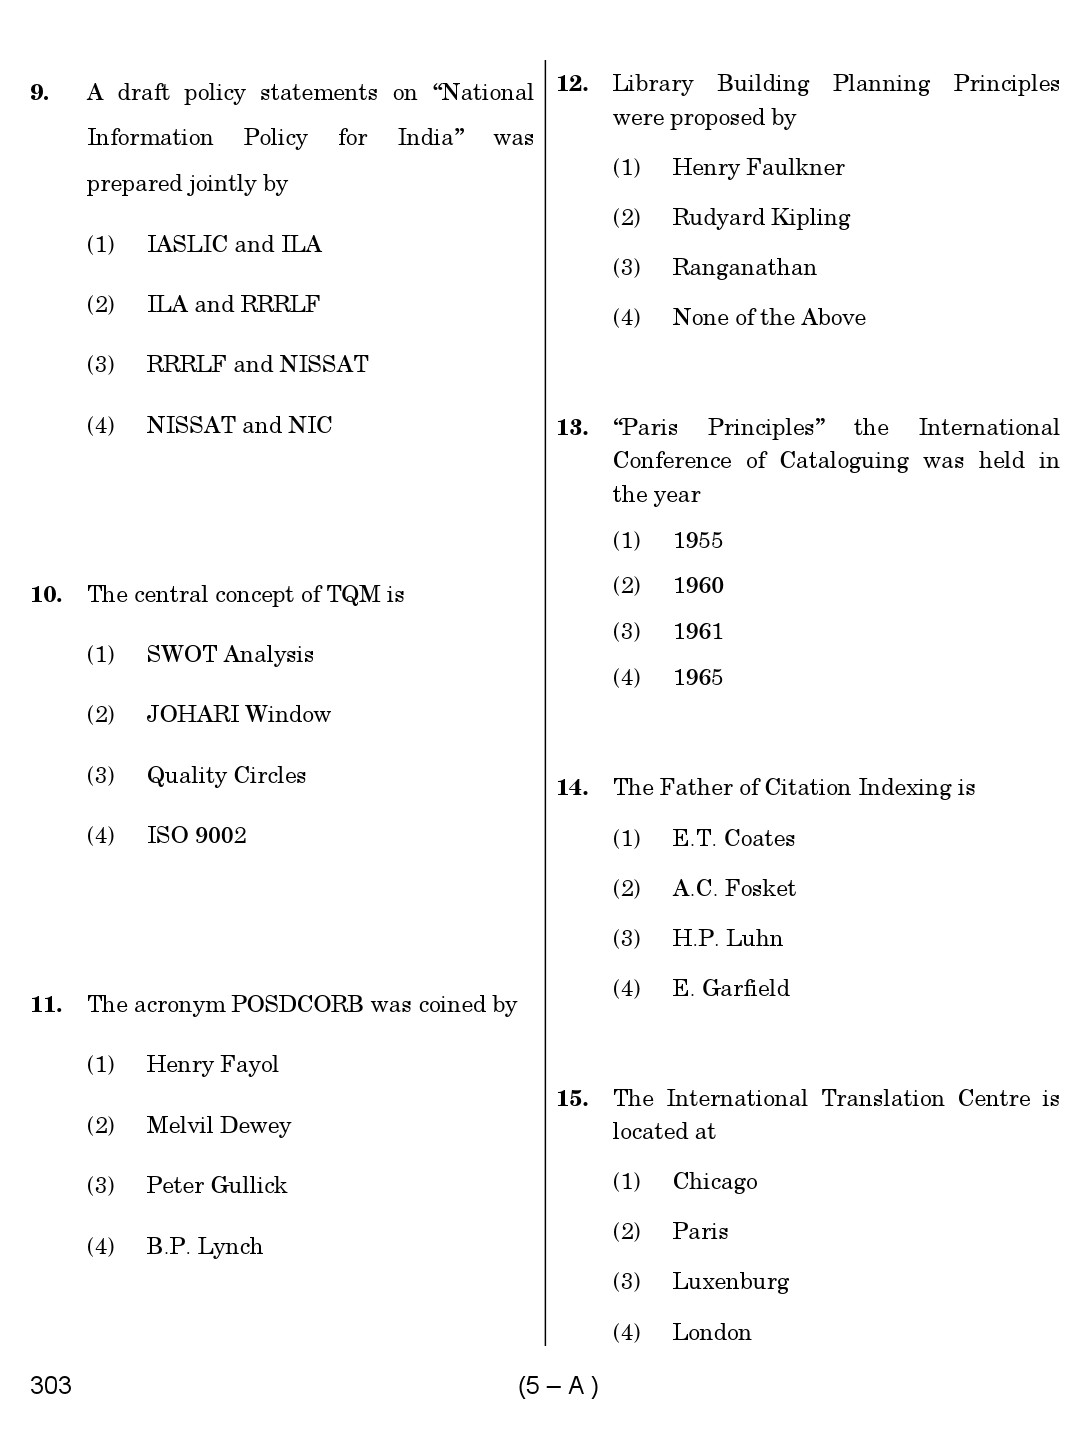 Karnataka PSC 303 Specific Paper II Librarian Exam Sample Question Paper 5